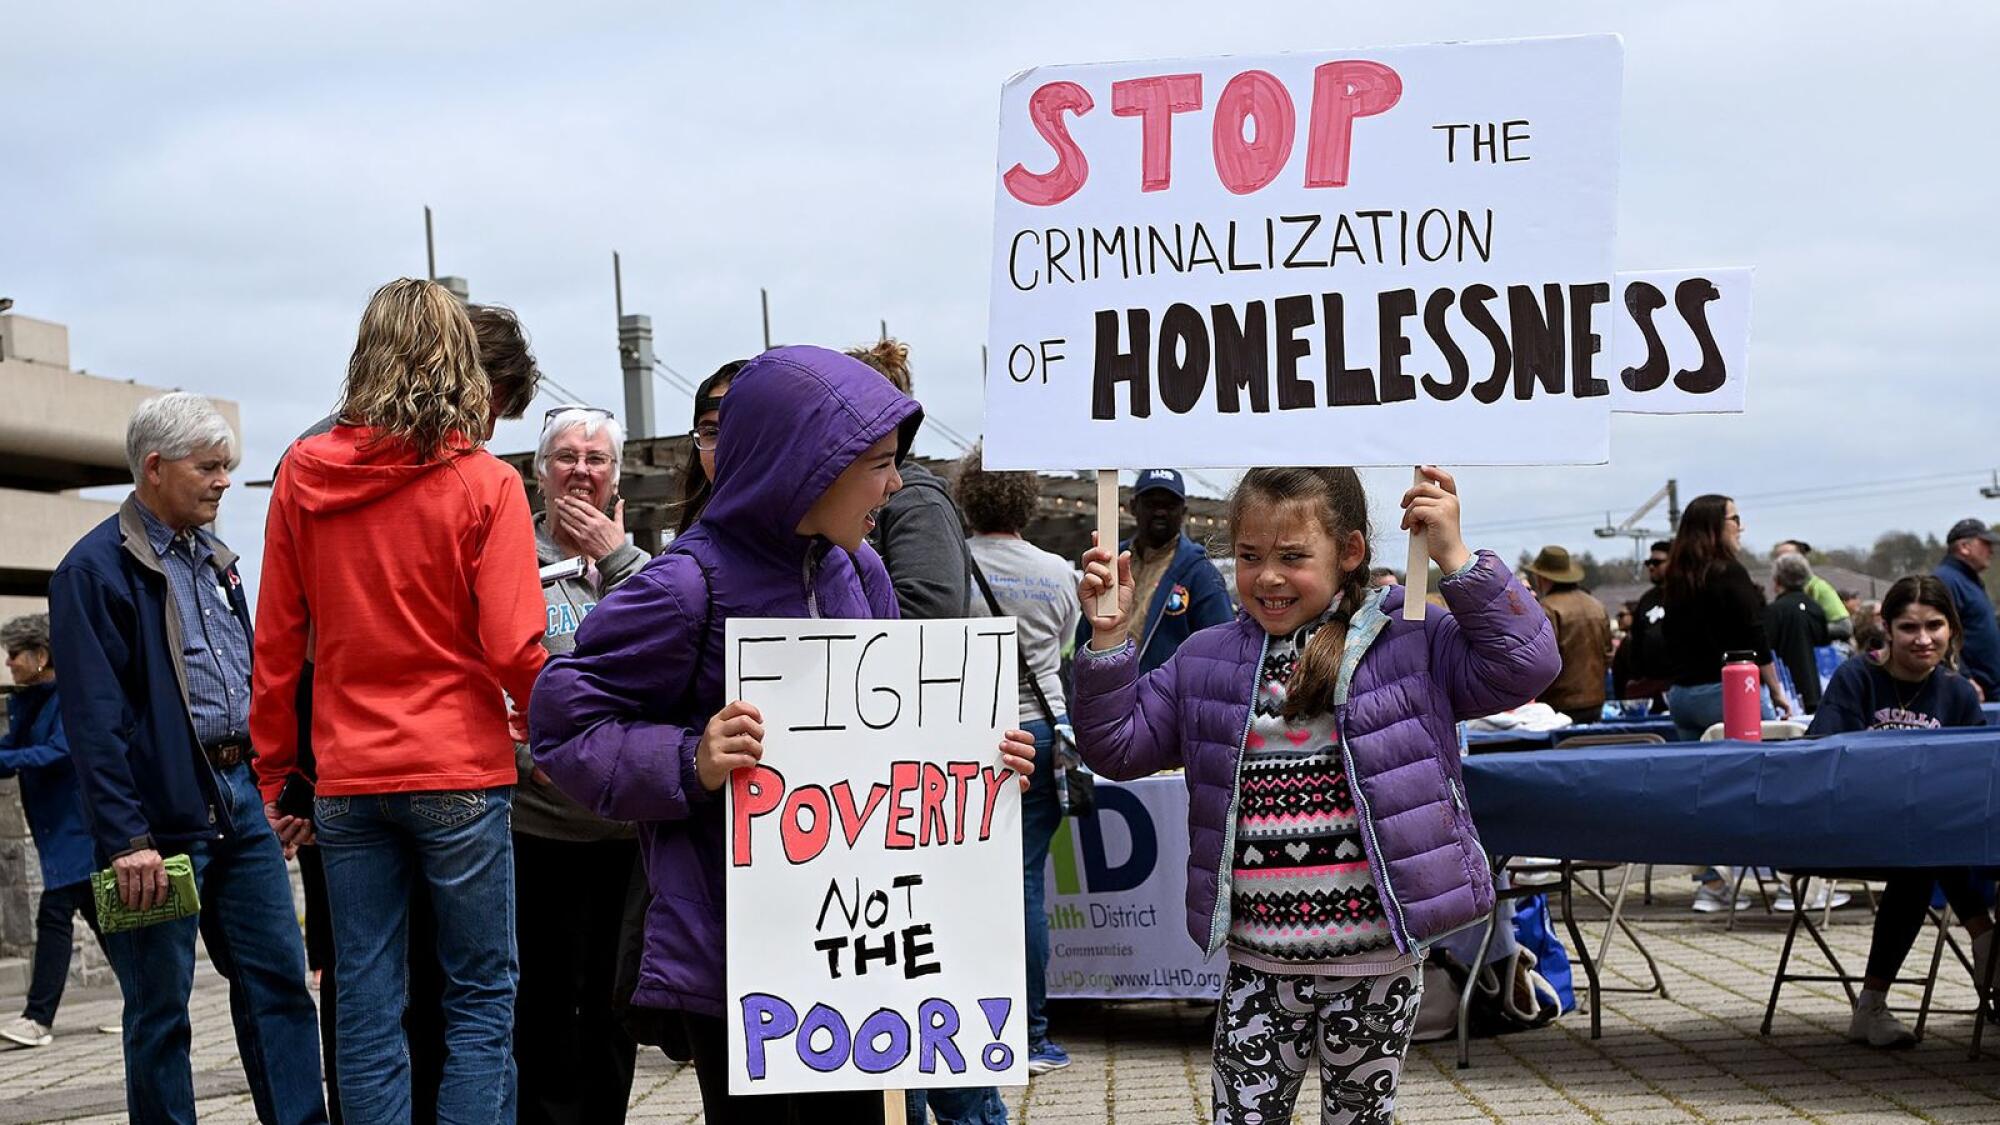 Two young children hold signs reading “Fight poverty not the poor” “Stop the Criminalization of Homelessness” 